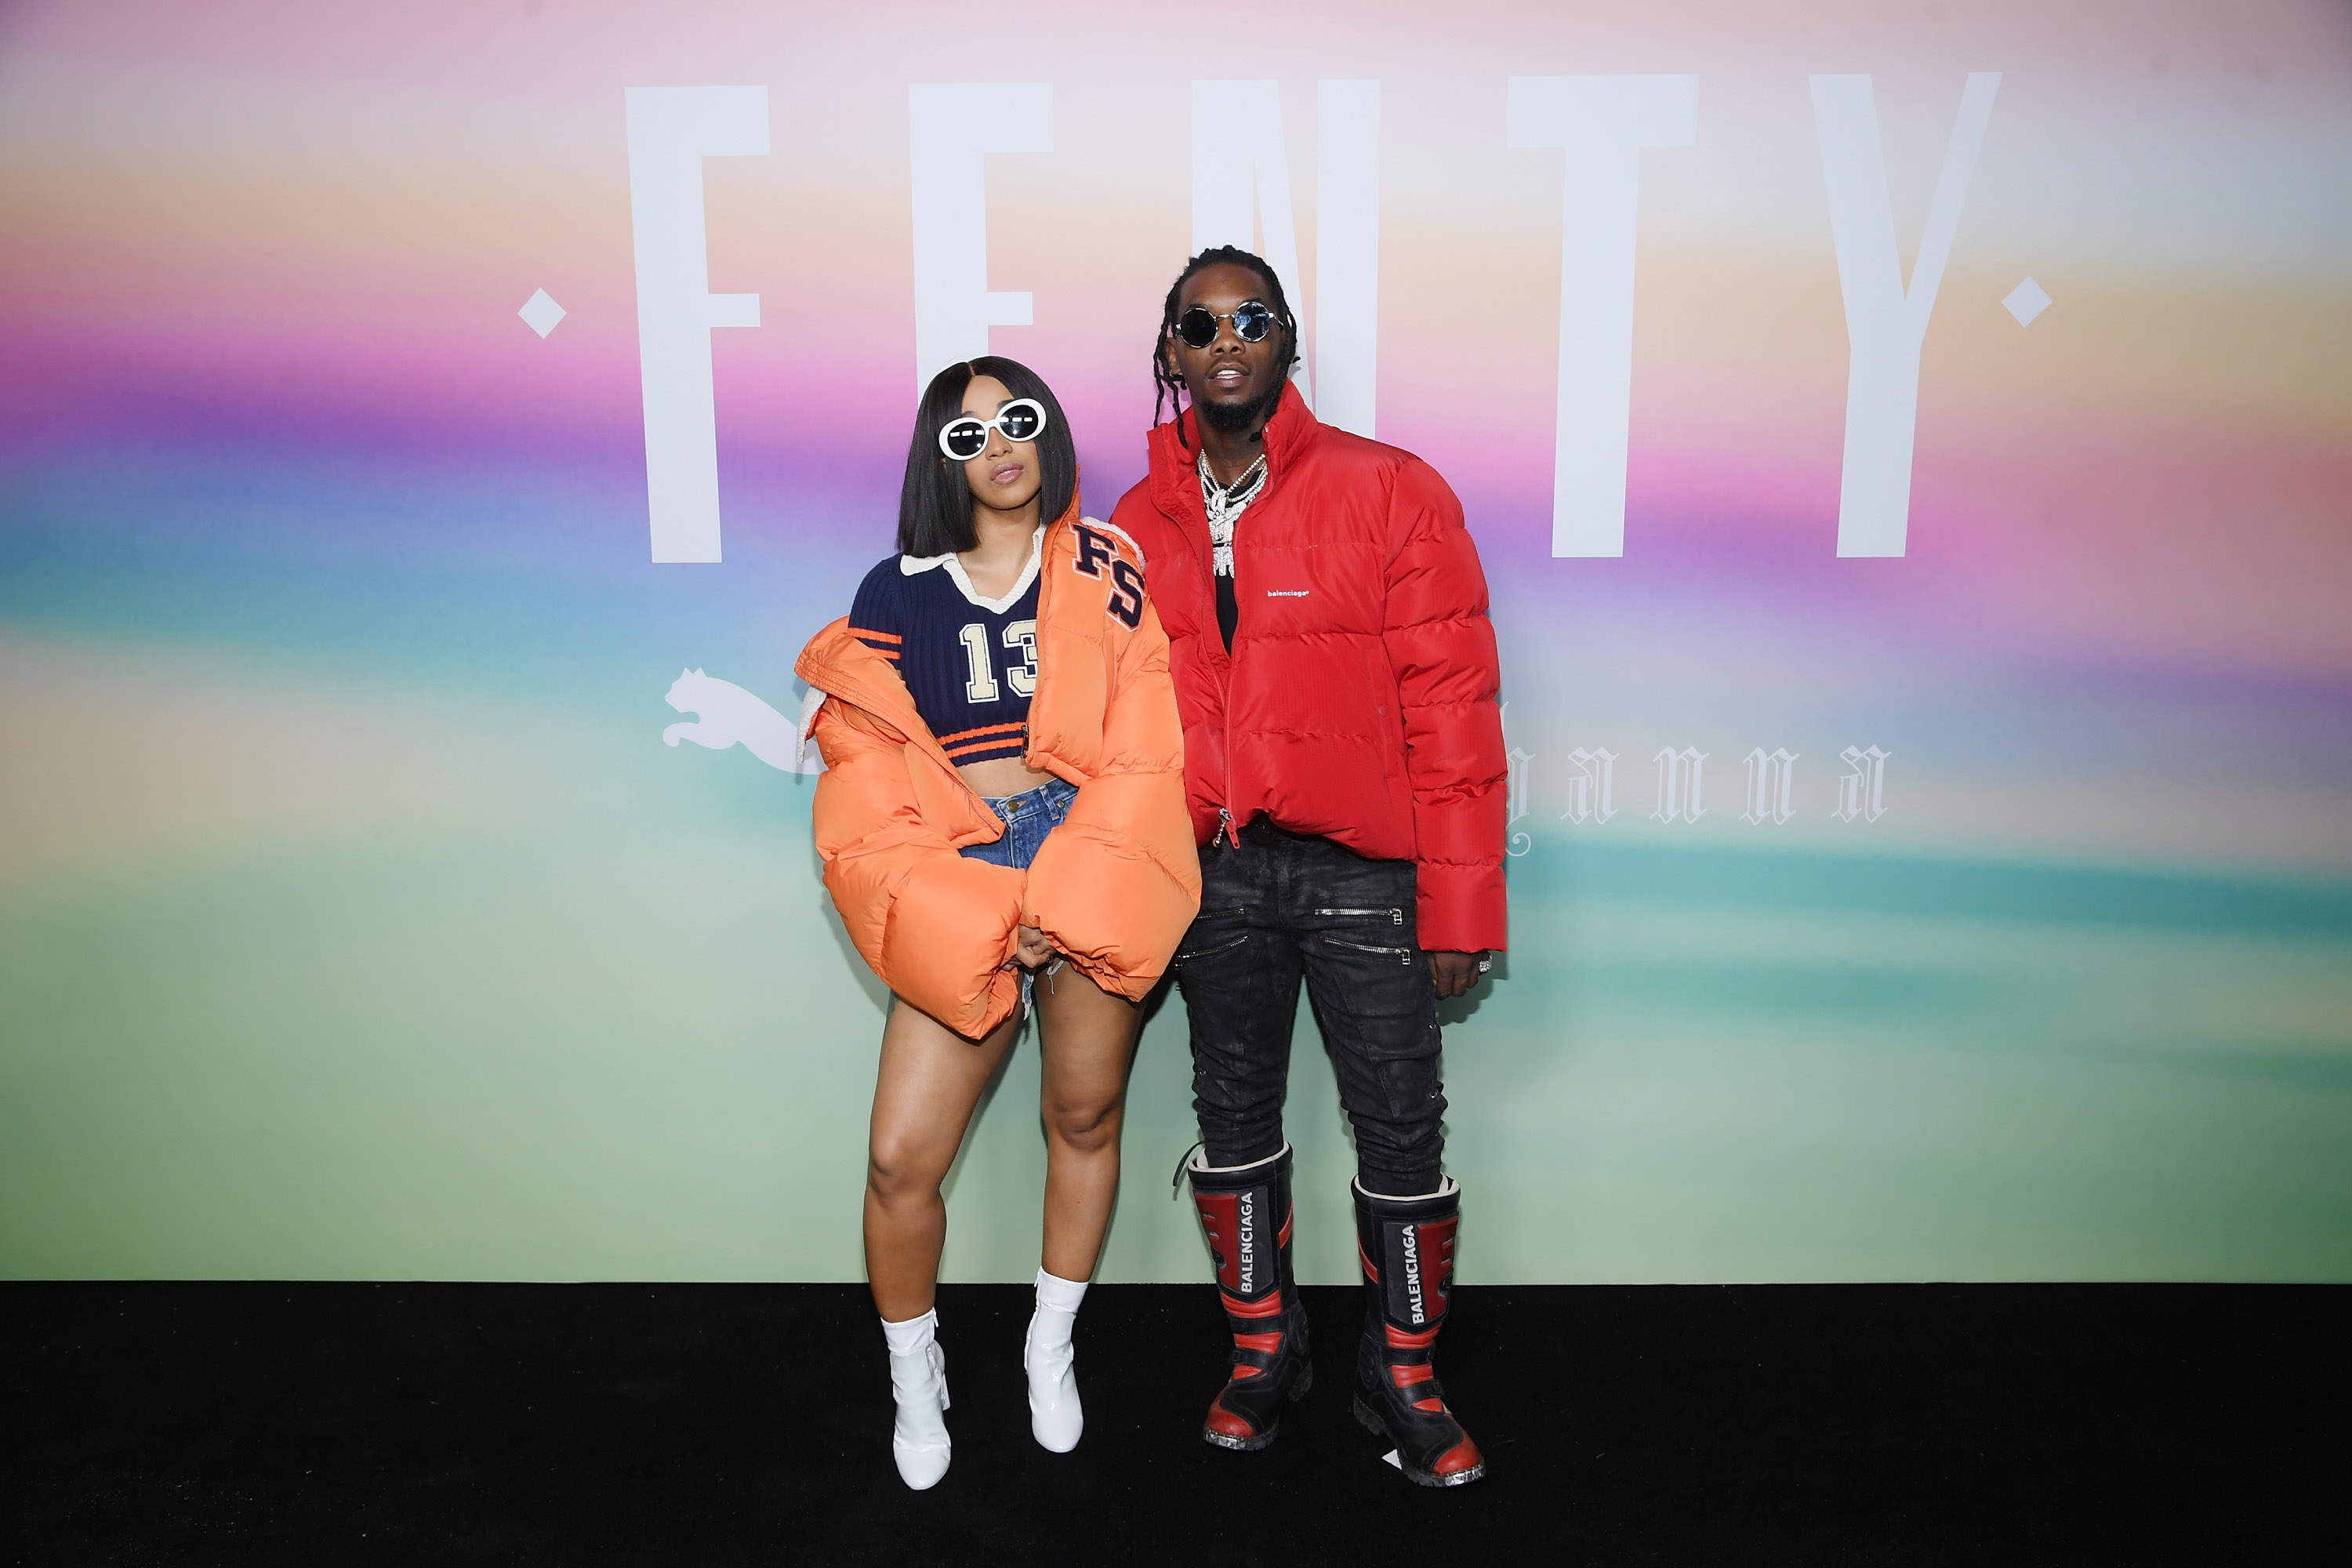 Cardi B Defends Offset Cheating Rumors: “I Ain’t No Angel”